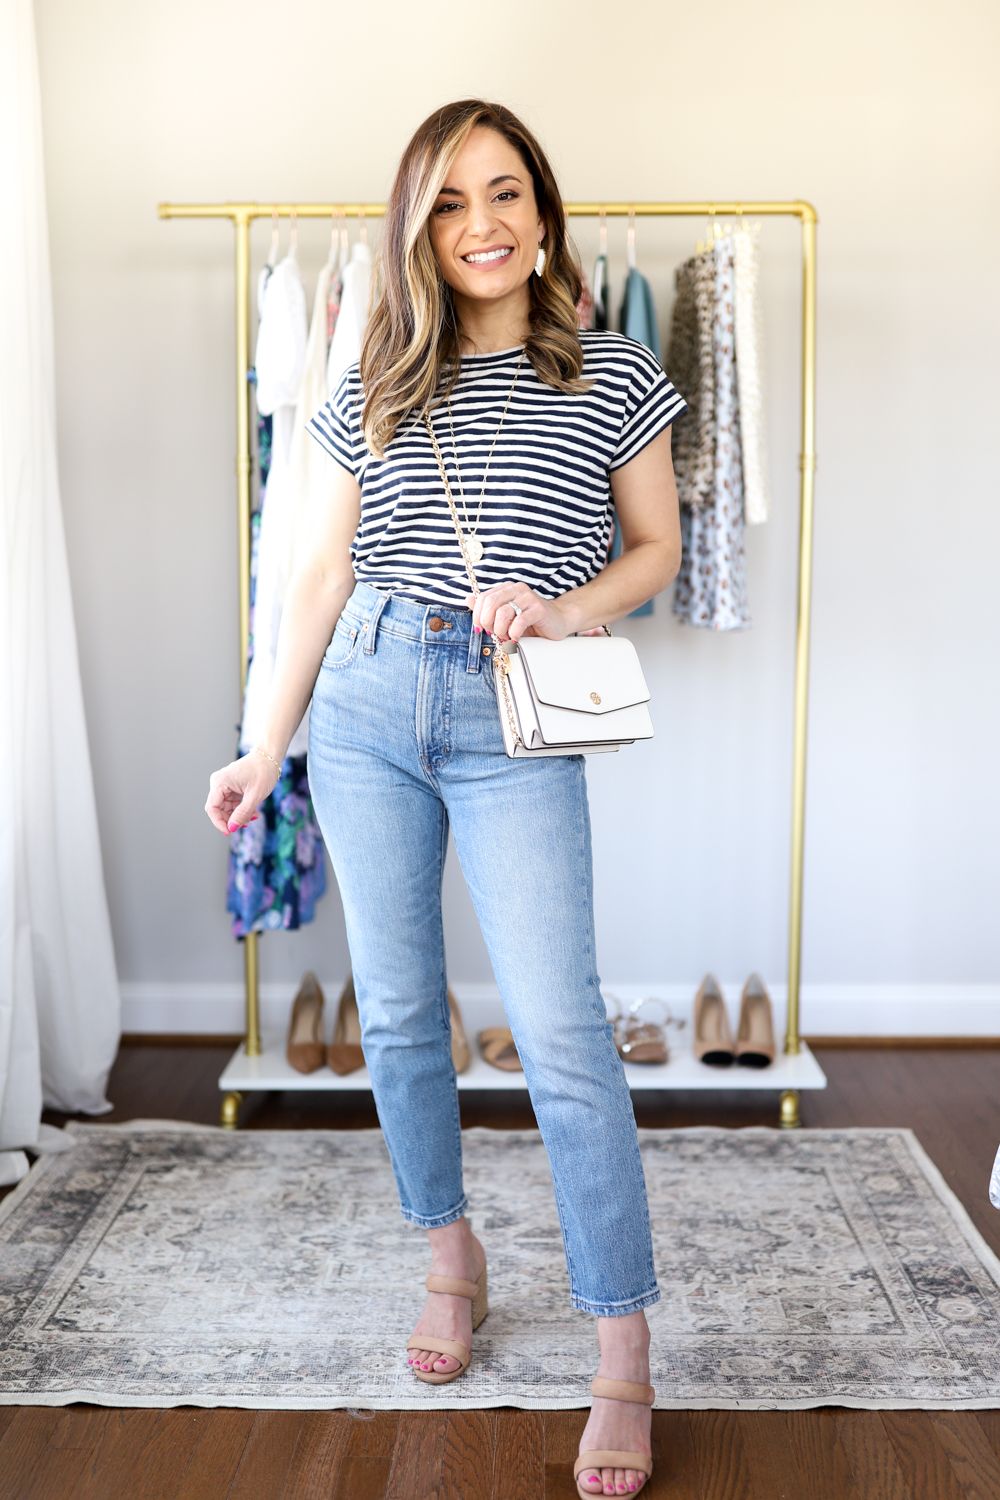 Try out the new petite jeans